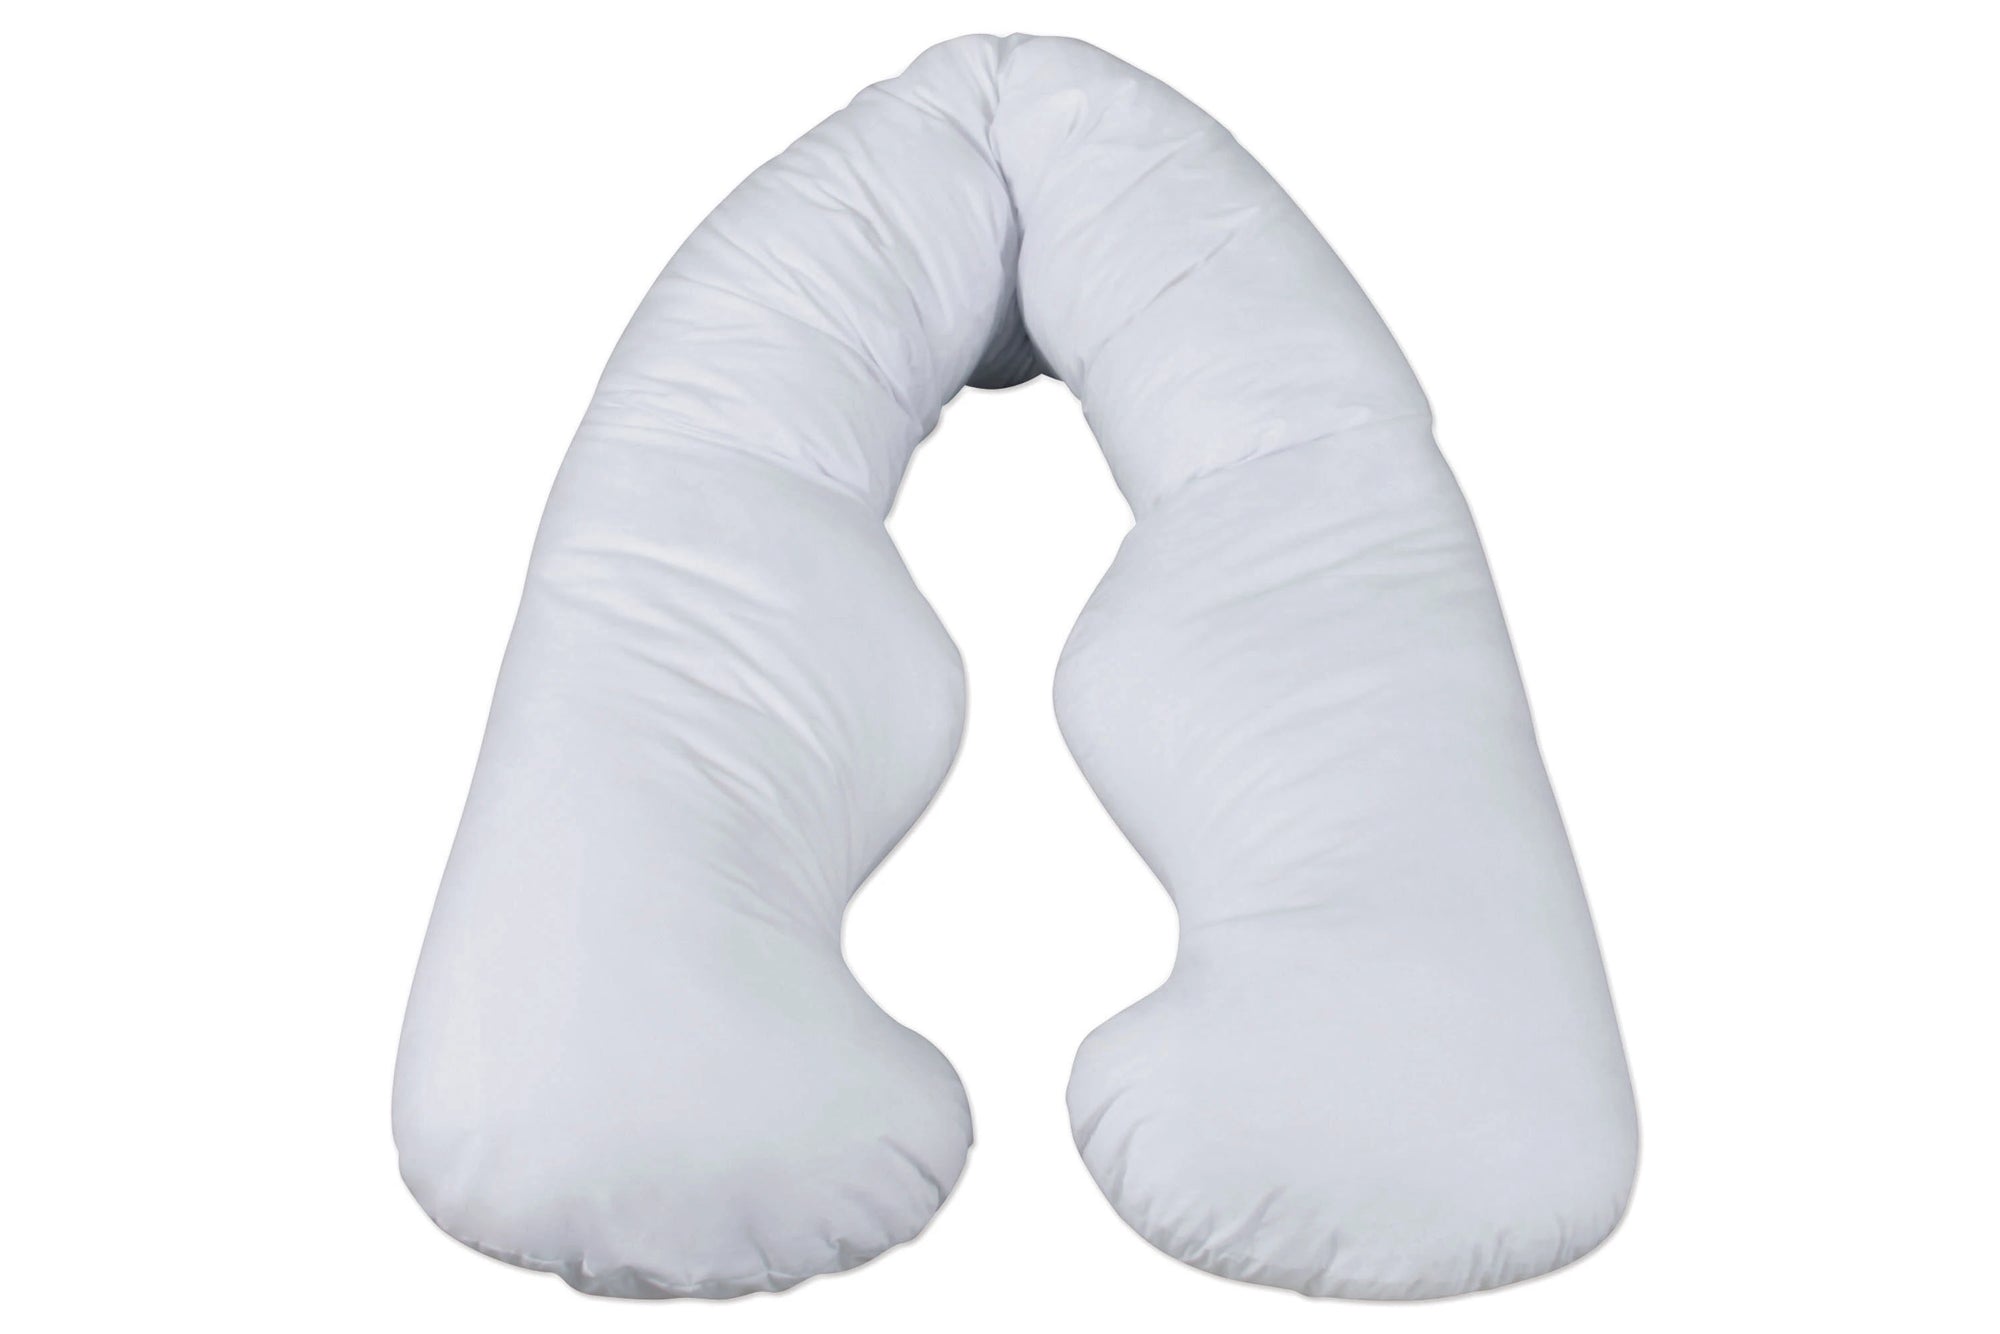 Back 'N Belly Bliss Product Only Lifestyle in Soothing White